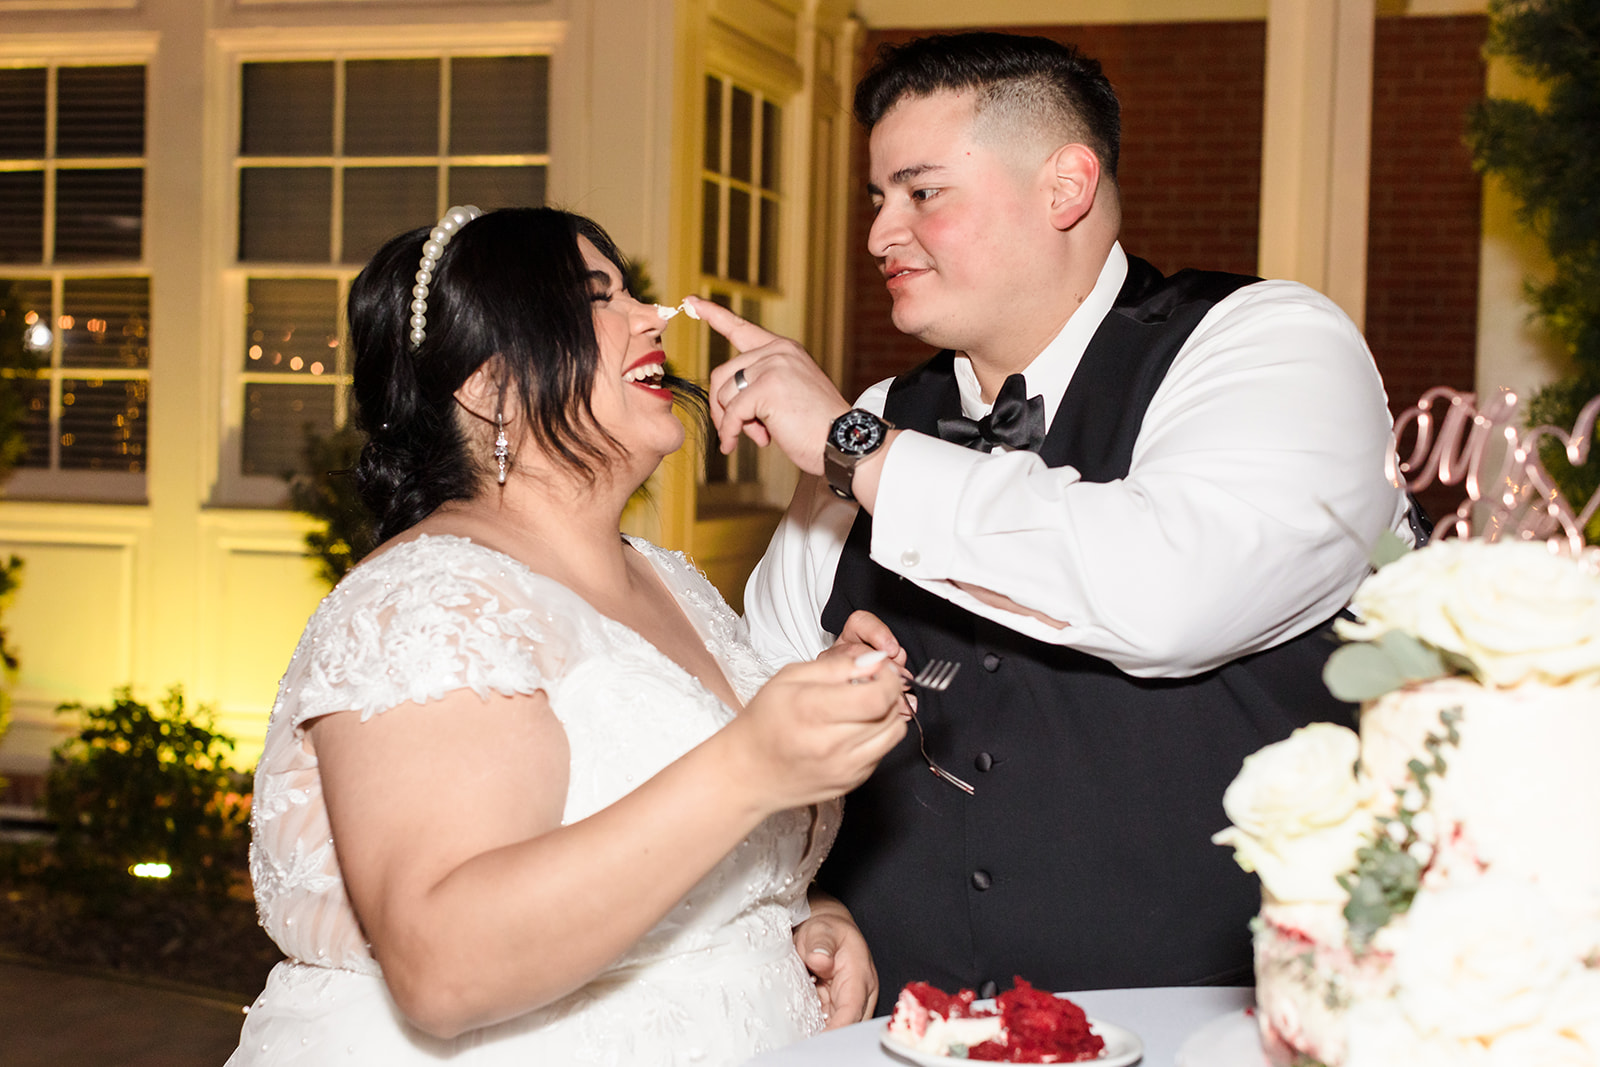 The groom smears cake frosting on the bride's nose and she laughs as they cut their wedding cake